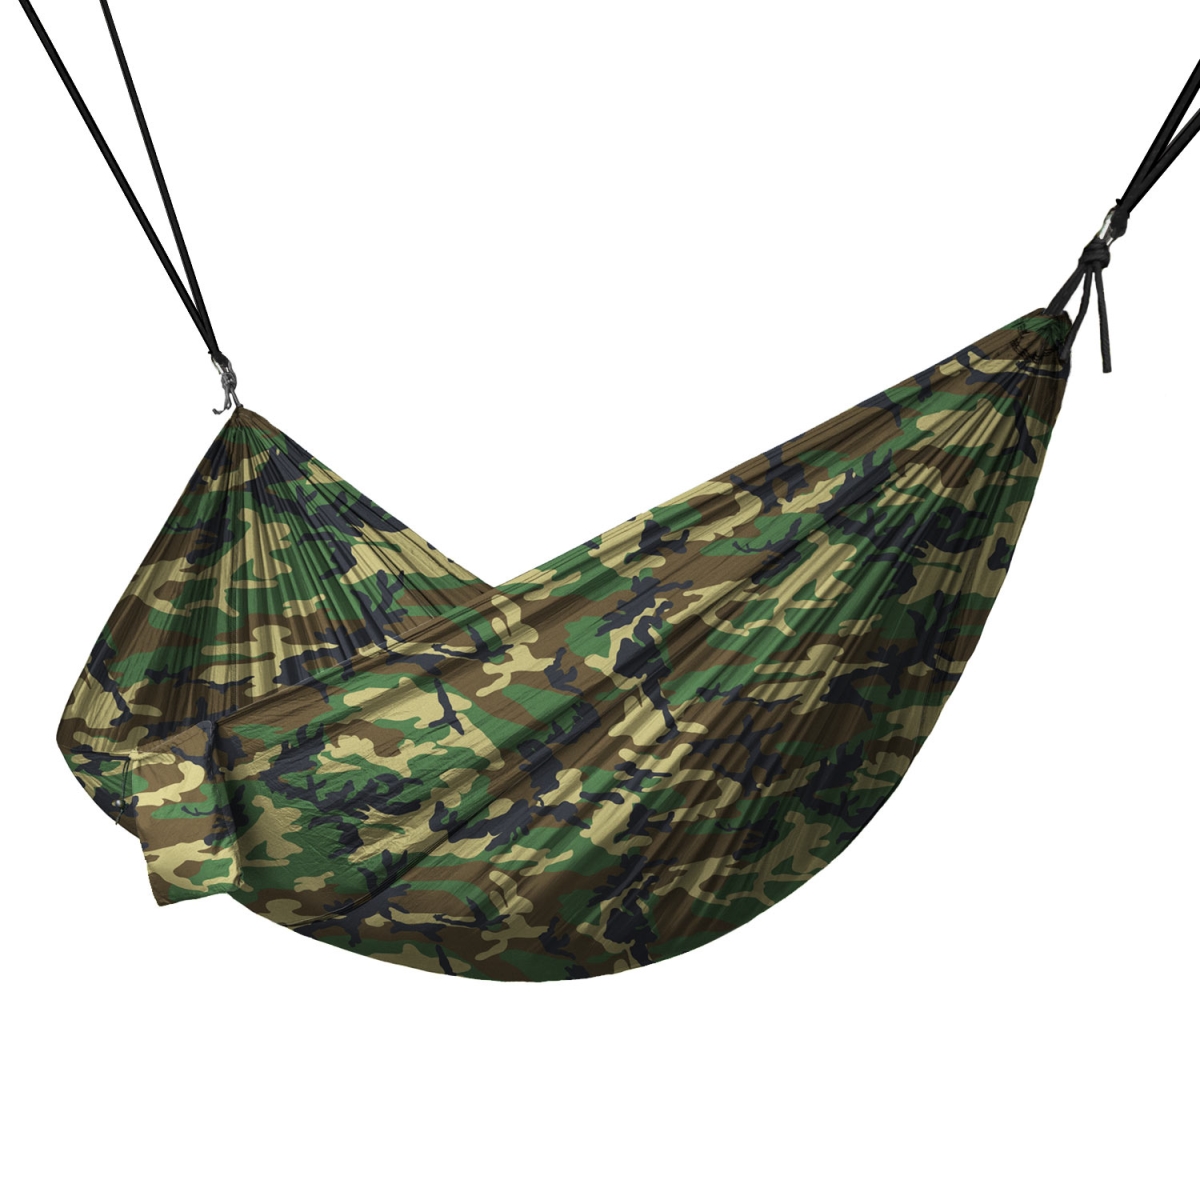 Ham-006 Portable 2 Person Hammock Rope Hanging Swing Camping, Camouflage